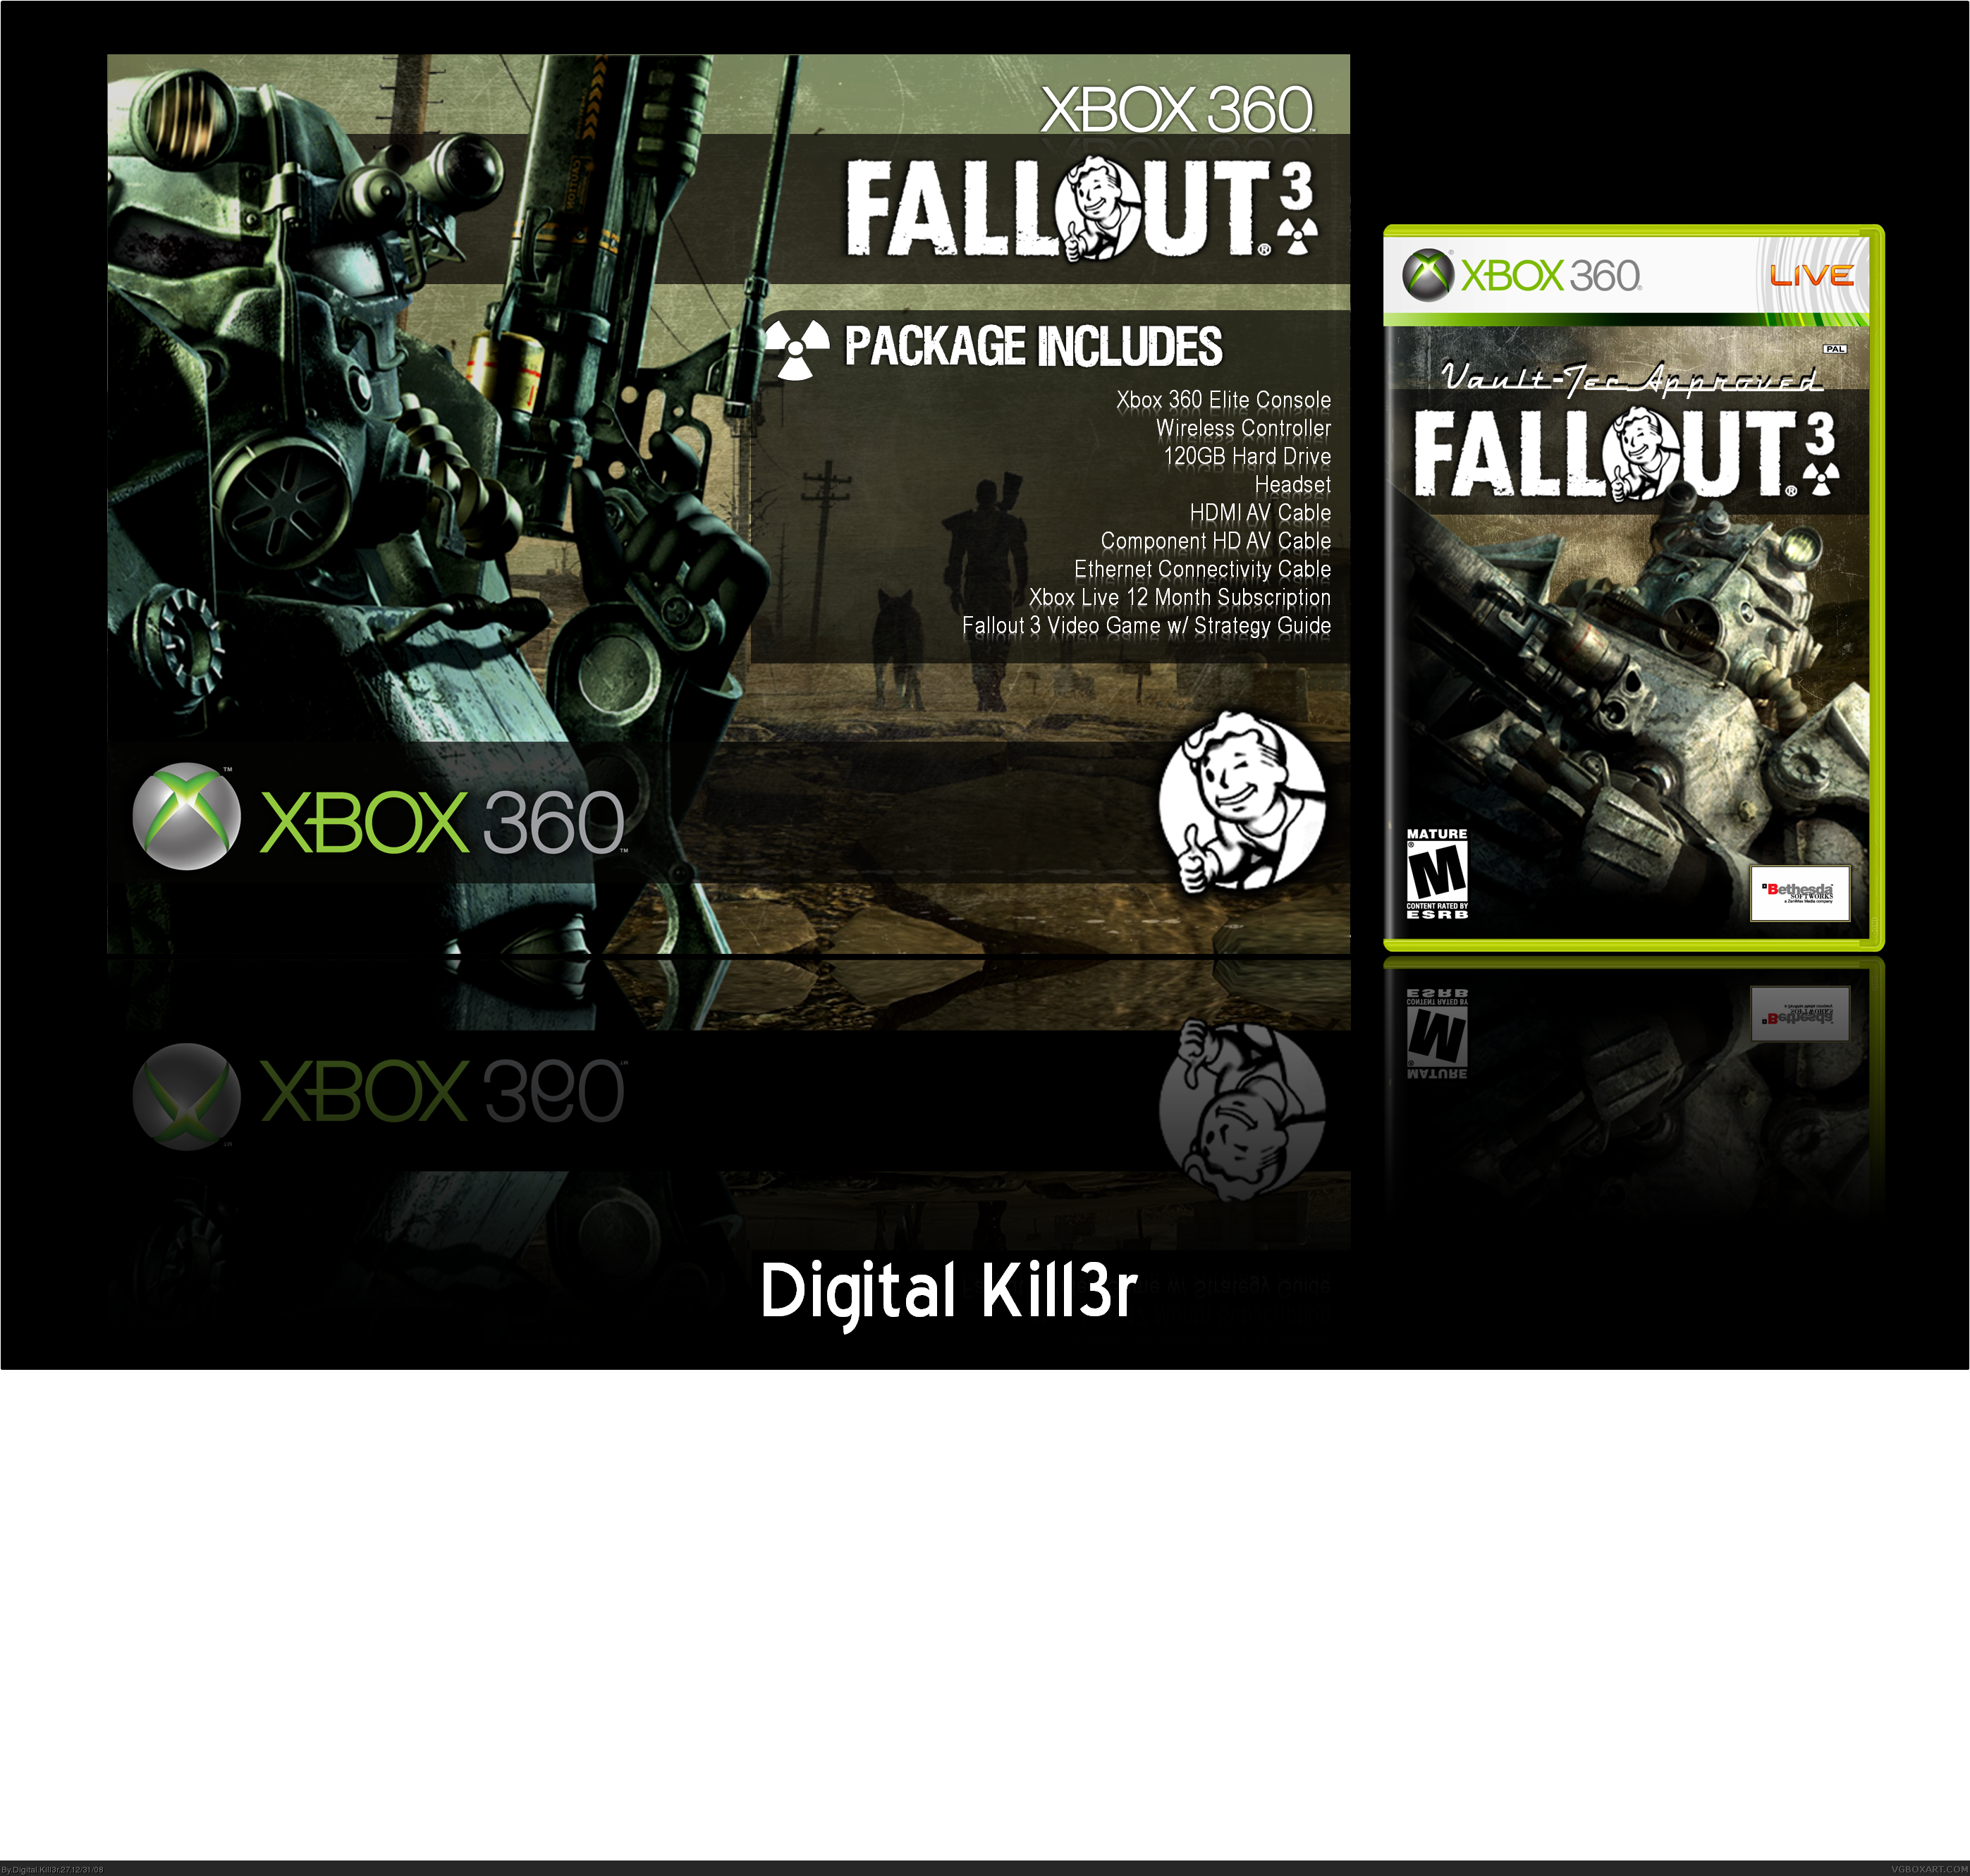 Fallout 3 Special Edition box cover